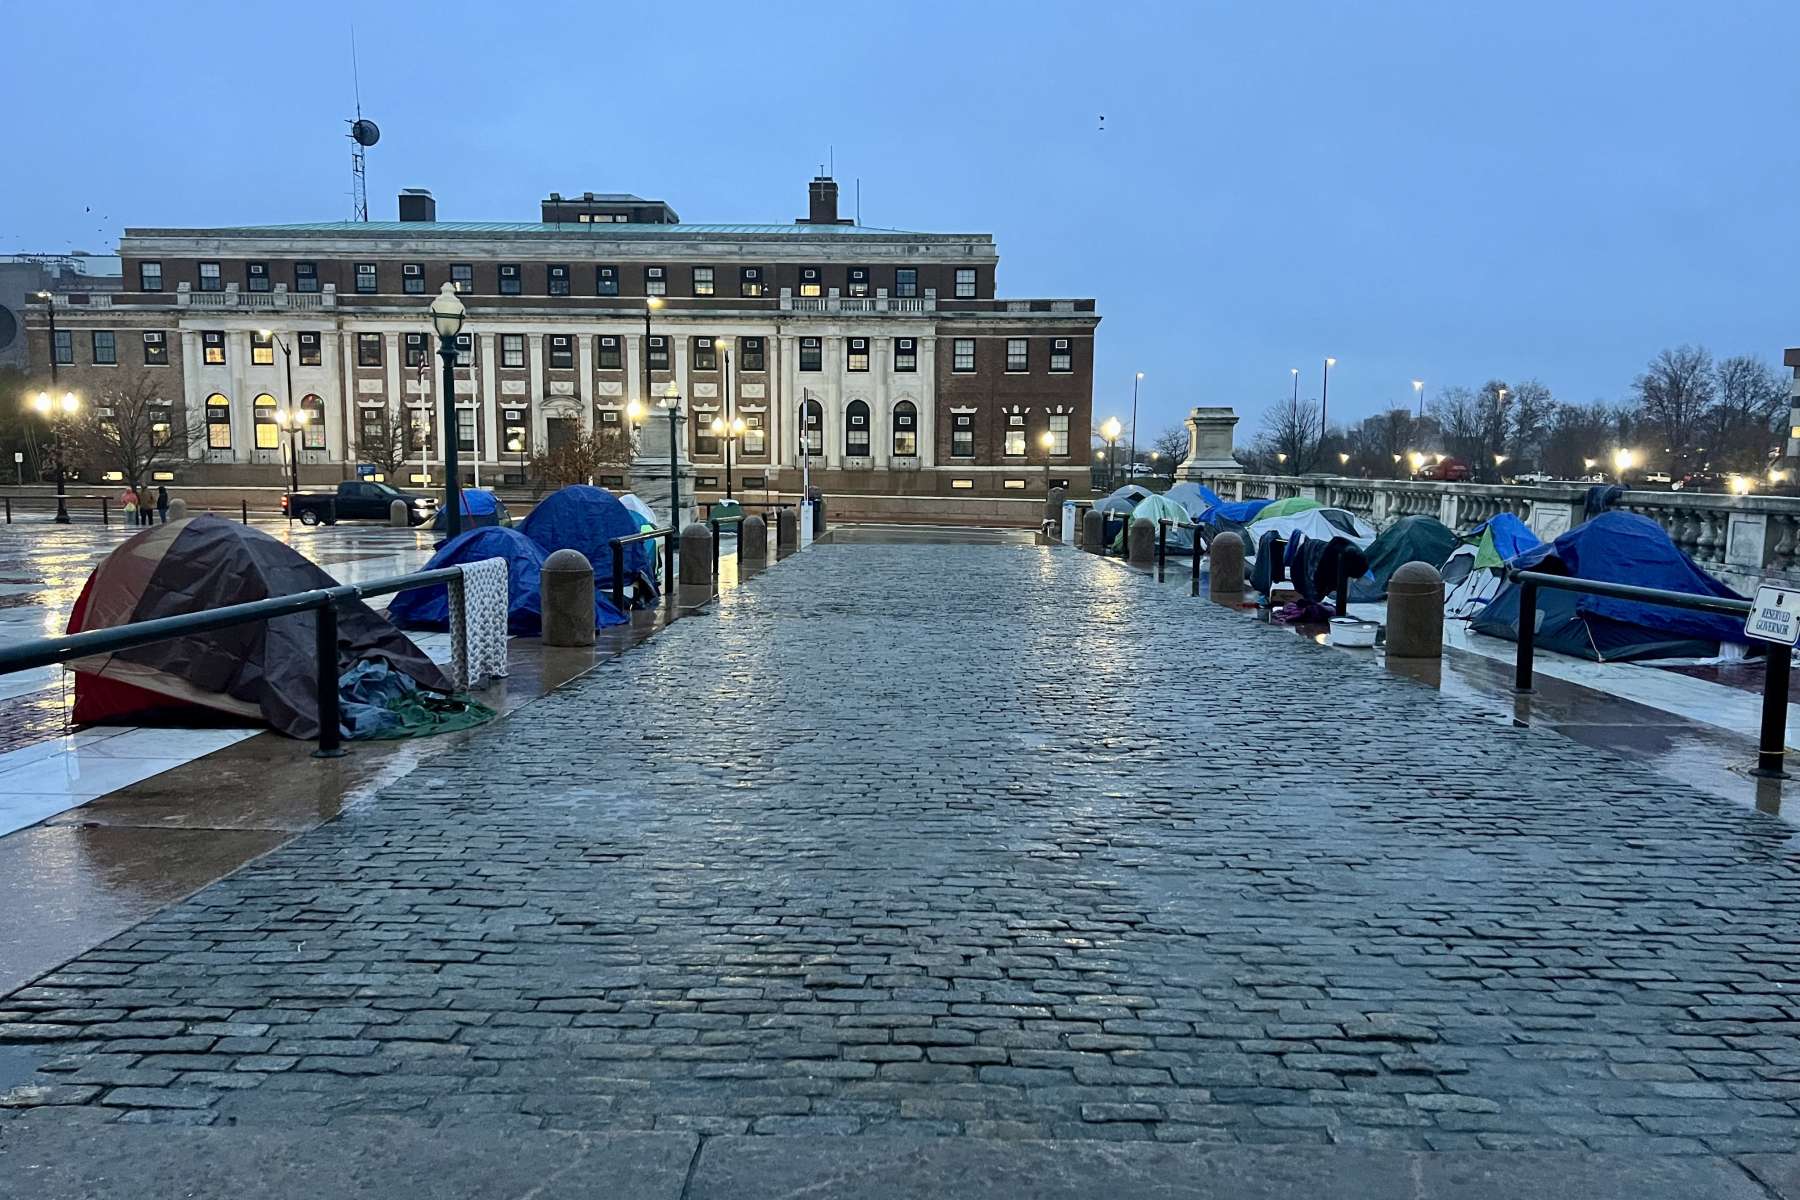 State House homeless encampment served 48-hour eviction notice